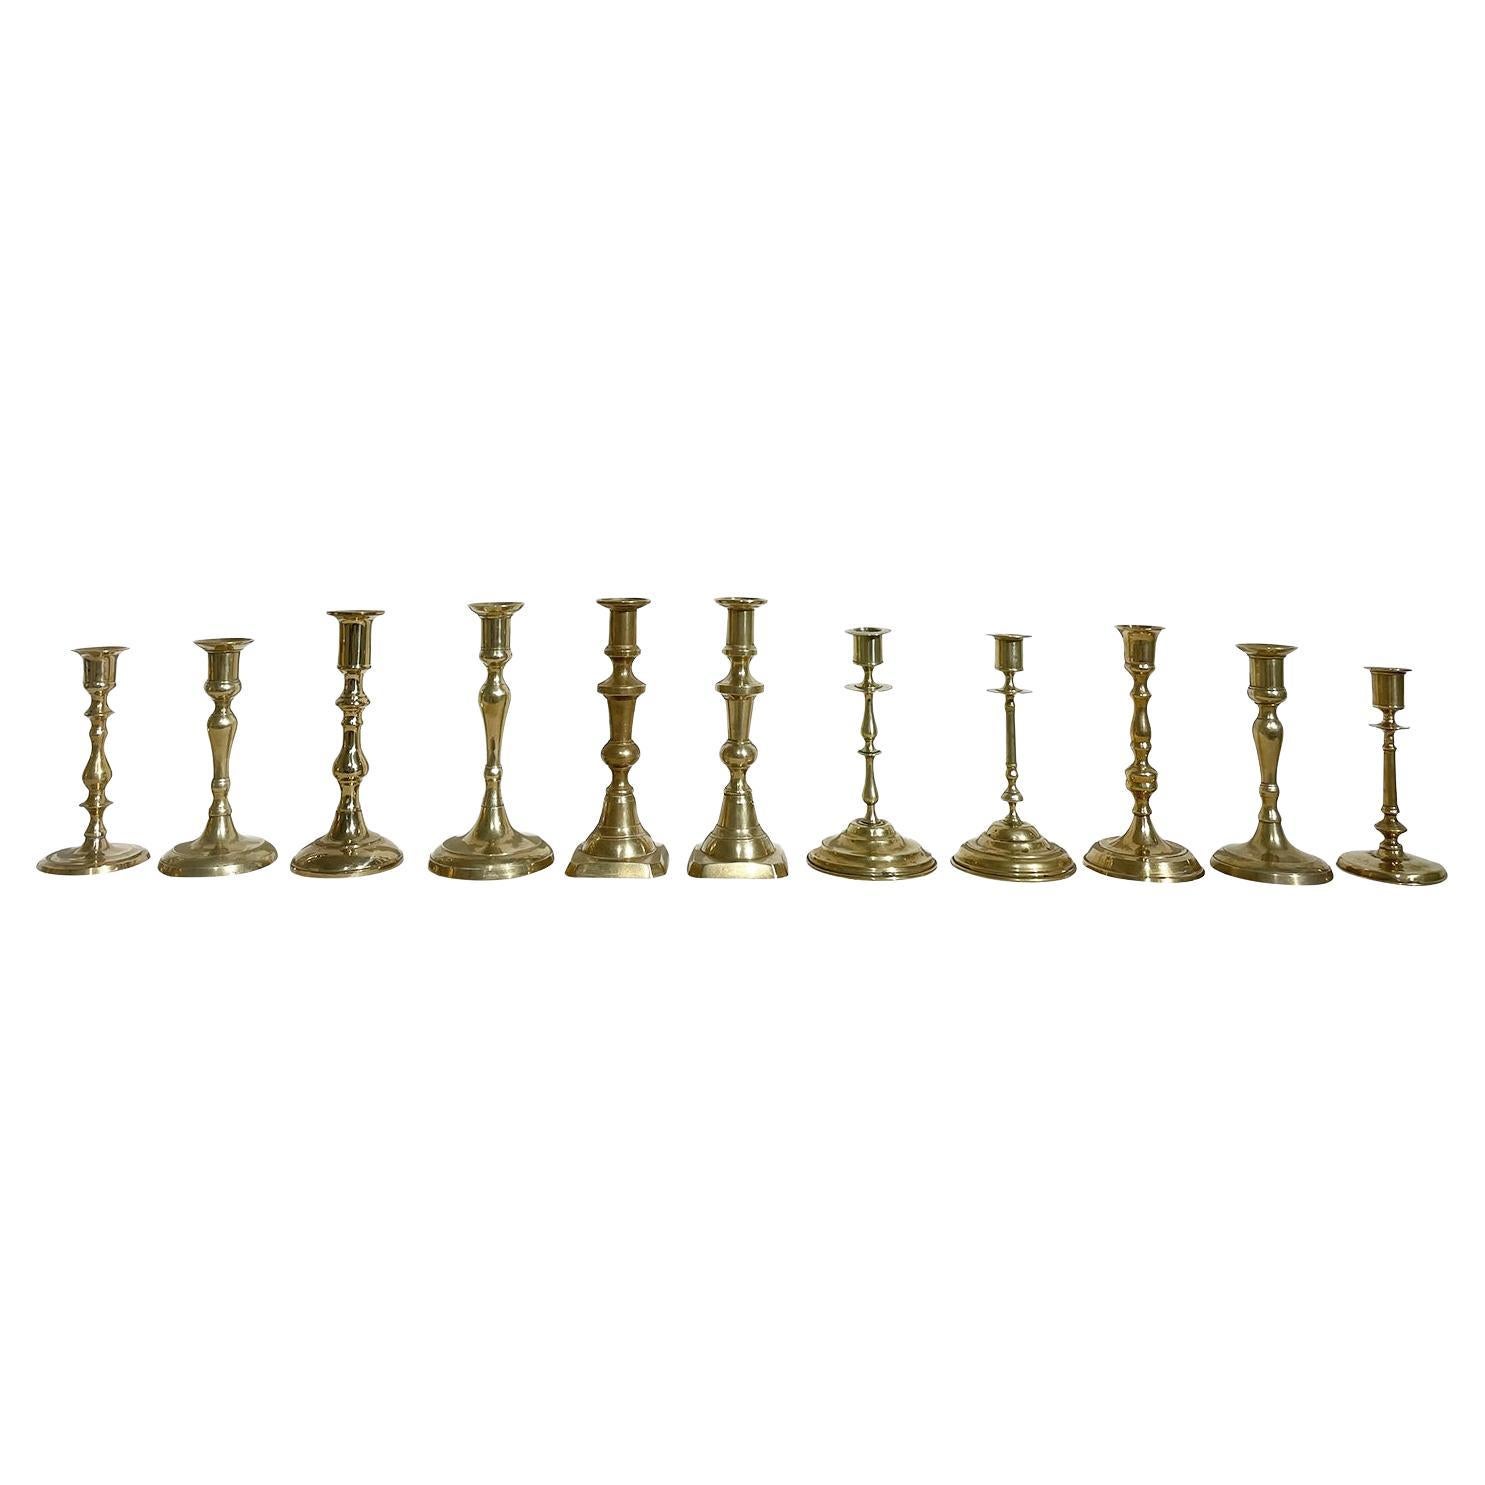 20th Century Gold Swedish Gustavian Similar Set of Eleven Brass Candle Holders For Sale